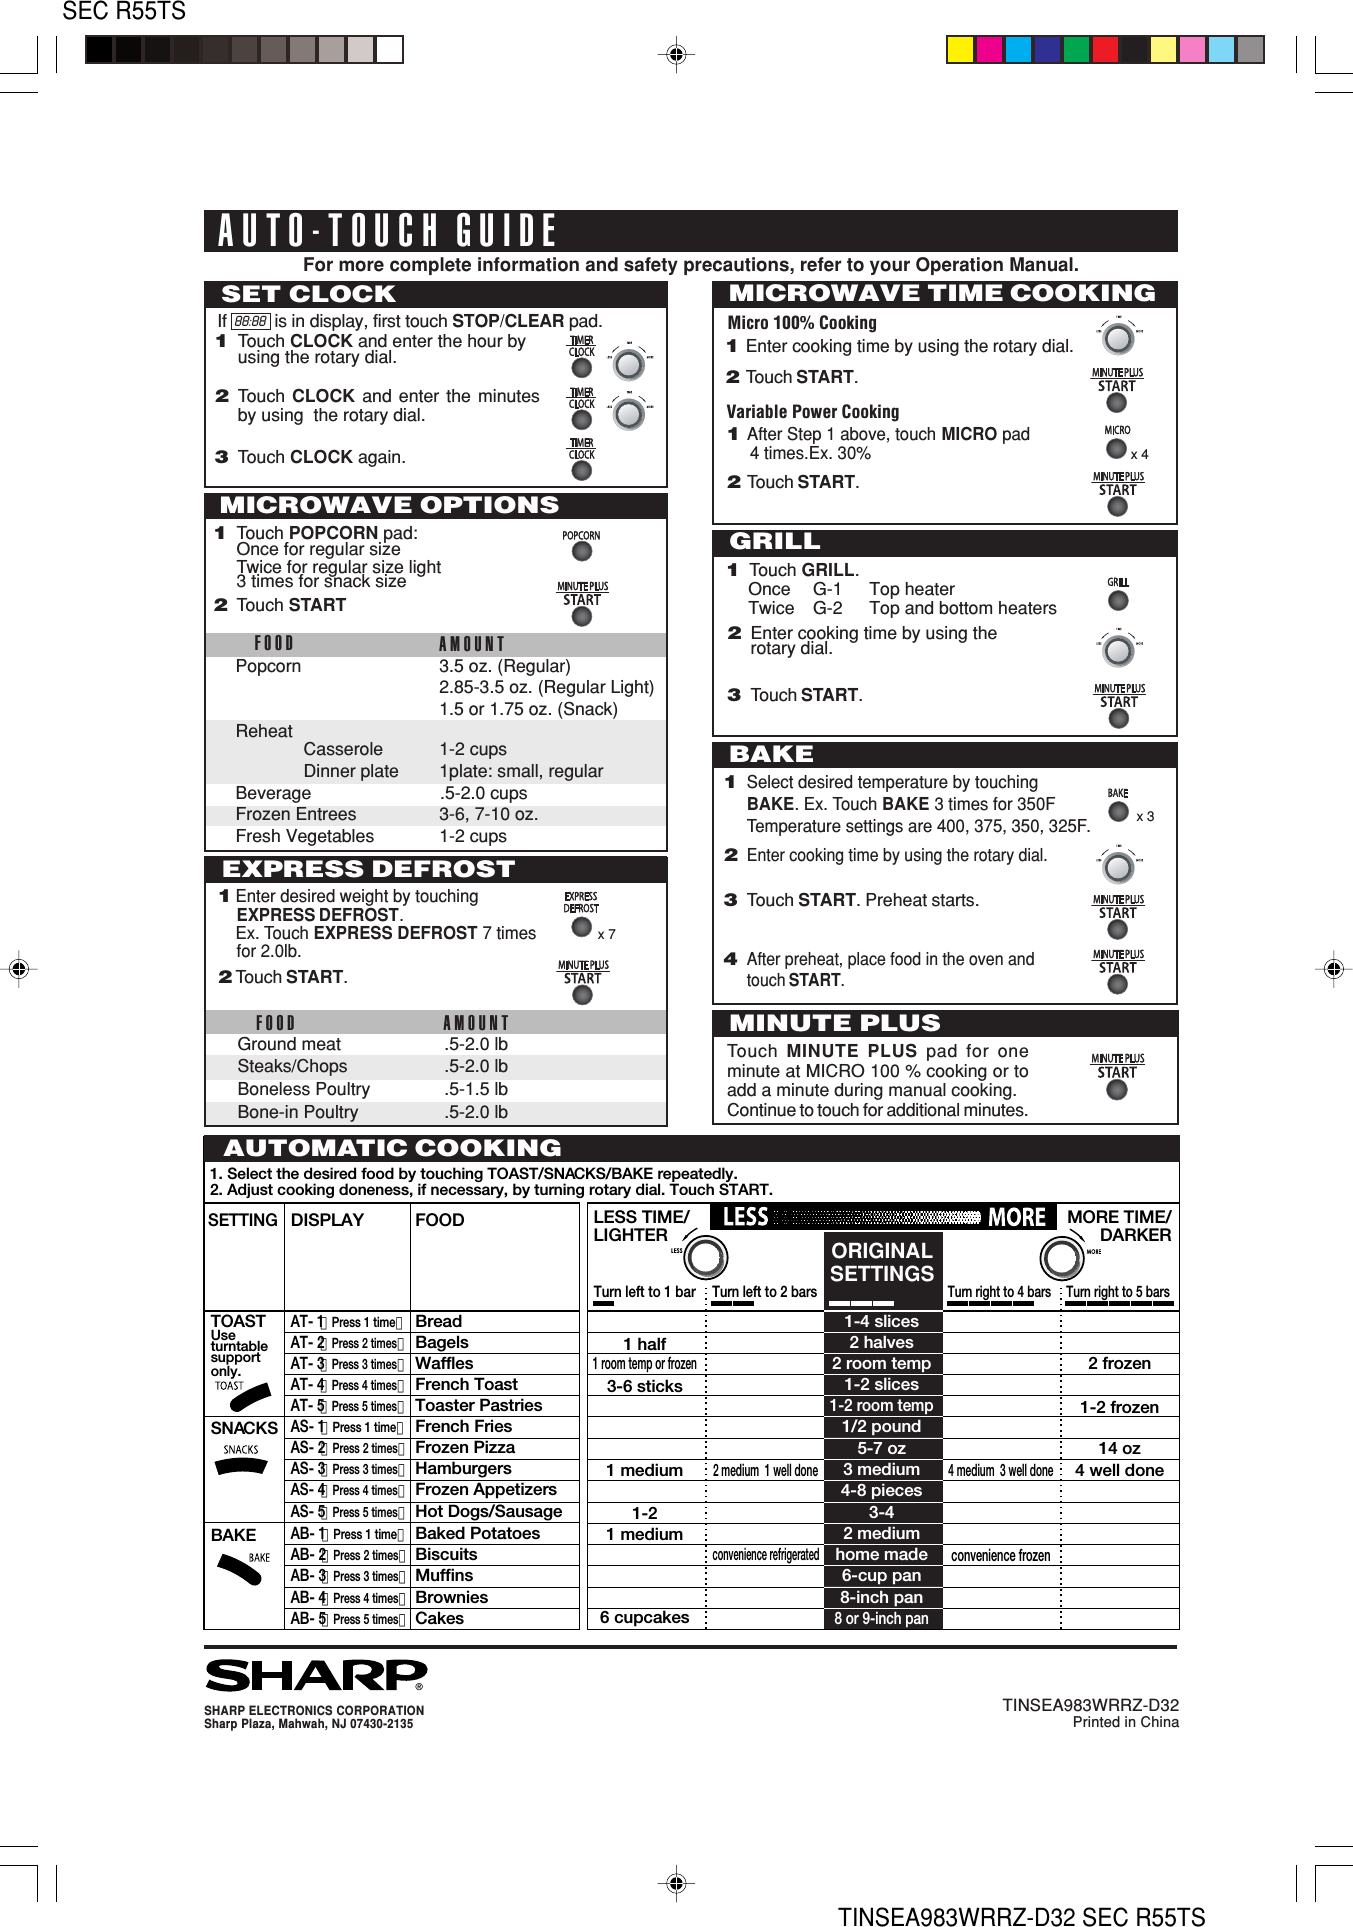 26SEC R55TSTINSEA983WRRZ-D32 SEC R55TS®SHARP ELECTRONICS CORPORATIONSharp Plaza, Mahwah, NJ 07430-2135TINSEA983WRRZ-D32Printed in ChinaAUTO-TOUCH GUIDEFor more complete information and safety precautions, refer to your Operation Manual.1. Select the desired food by touching TOAST/SNACKS/BAKE repeatedly.2. Adjust cooking doneness, if necessary, by turning rotary dial. Touch START.LESS TIME/LIGHTER1-4 slicesMORE TIME/DARKER2 halves2 room temp1-2 slices1-2 room temp1/2 pound5-7 oz3 medium2 frozen14 oz1-2 frozen4 well done4-8 pieces3-42 mediumhome made4 medium  3 well doneconvenience frozen2 medium  1 well doneconvenience refrigerated6-cup pan8-inch pan8 or 9-inch pan1 half1 room temp or frozen3-6 sticks1 medium1-21 medium6 cupcakesORIGINALSETTINGSTurn left to 2 barsTurn left to 1 barTurn right to 5 barsTurn right to 4 barsSETTINGDISPLAY FOODTOASTUse turntablesupportonly.AT- 1（Press 1 time）BreadSNACKSAS- 1（Press 1 time）French FriesBAKEAB- 1（Press 1 time）Baked PotatoesAT- 2（Press 2 times）BagelsAS- 2（Press 2 times）Frozen PizzaAB- 2（Press 2 times）BiscuitsAT- 3（Press 3 times）WafflesAS- 3（Press 3 times）HamburgersAB- 3（Press 3 times）MuffinsAT- 4（Press 4 times）French ToastAS- 4（Press 4 times）Frozen AppetizersAB- 4（Press 4 times）BrowniesAT- 5（Press 5 times）Toaster PastriesAS- 5（Press 5 times）Hot Dogs/SausageAB- 5（Press 5 times）CakesAUTOMATIC COOKINGMICROWAVE TIME COOKINGMicro 100% CookingSET CLOCK1Touch CLOCK and enter the hour byusing the rotary dial.2Touch  CLOCK  and enter the minutesby using  the rotary dial.3Touch CLOCK again.If  88:88  is in display, first touch STOP/CLEAR pad.FOOD AMOUNTGround meat .5-2.0 lbSteaks/Chops .5-2.0 lbBoneless Poultry .5-1.5 lbBone-in Poultry .5-2.0 lb1Enter desired weight by touchingEXPRESS DEFROST.Ex. Touch EXPRESS DEFROST 7 timesfor 2.0lb.2Touch START.EXPRESS DEFROSTMINUTE PLUSTouch  MINUTE PLUS pad for oneminute at MICRO 100 % cooking or toadd a minute during manual cooking.Continue to touch for additional minutes.FOOD AMOUNTPopcorn 3.5 oz. (Regular)2.85-3.5 oz. (Regular Light)1.5 or 1.75 oz. (Snack)ReheatCasserole 1-2 cupsDinner plate 1plate: small, regularBeverage .5-2.0 cupsFrozen Entrees 3-6, 7-10 oz.Fresh Vegetables 1-2 cupsMICROWAVE OPTIONSBAKE1Select desired temperature by touchingBAKE. Ex. Touch BAKE 3 times for 350FTemperature settings are 400, 375, 350, 325F.2Enter cooking time by using the rotary dial.3Touch START. Preheat starts.4After preheat, place food in the oven andtouch START.1Touch GRILL.Once G-1 Top heaterTwice G-2 Top and bottom heatersGRILL1Touch POPCORN pad:Once for regular sizeTwice for regular size light3 times for snack size2Touch START2Enter cooking time by using therotary dial.3Touch START.x 4Variable Power Cooking1After Step 1 above, touch MICRO pad4 times.Ex. 30%2Touch START.1Enter cooking time by using the rotary dial.2Touch START.x 3x 7